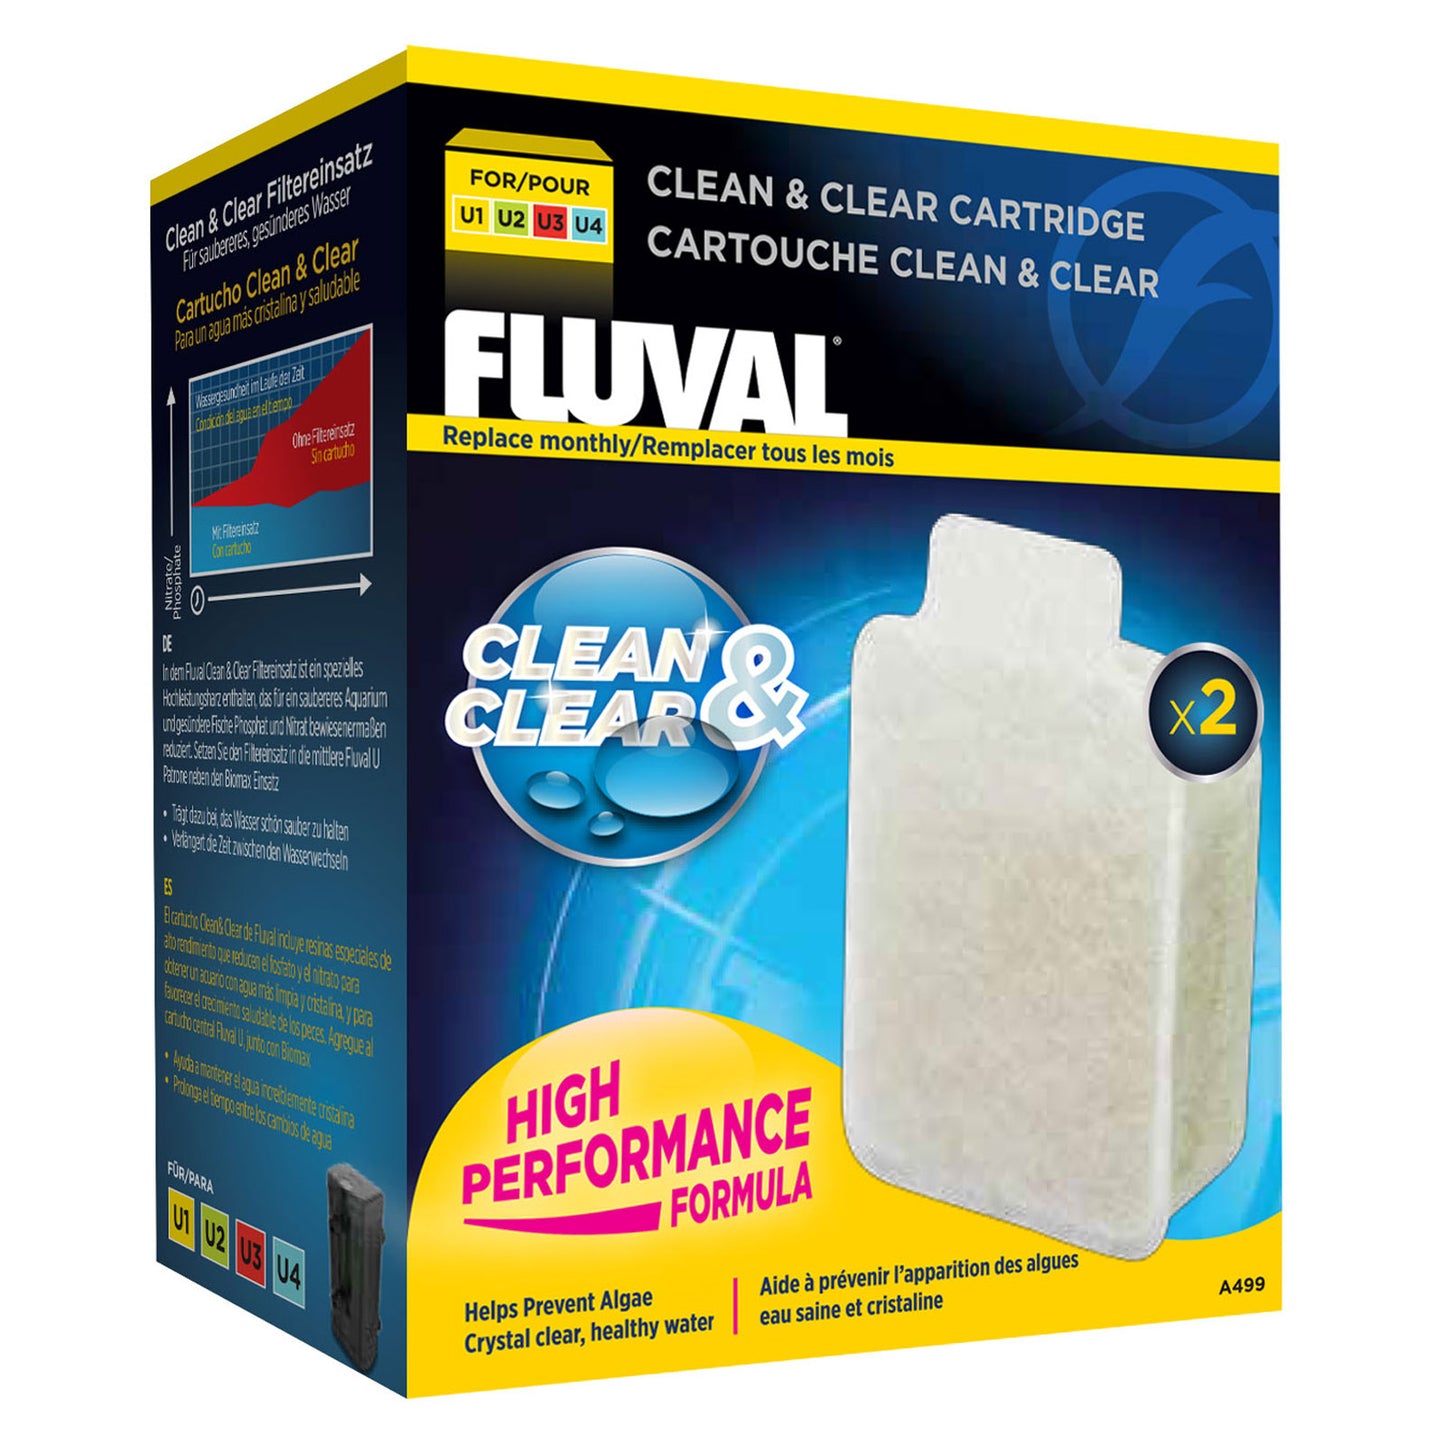 Fluval Clean & Clear Cartridge for U Filters